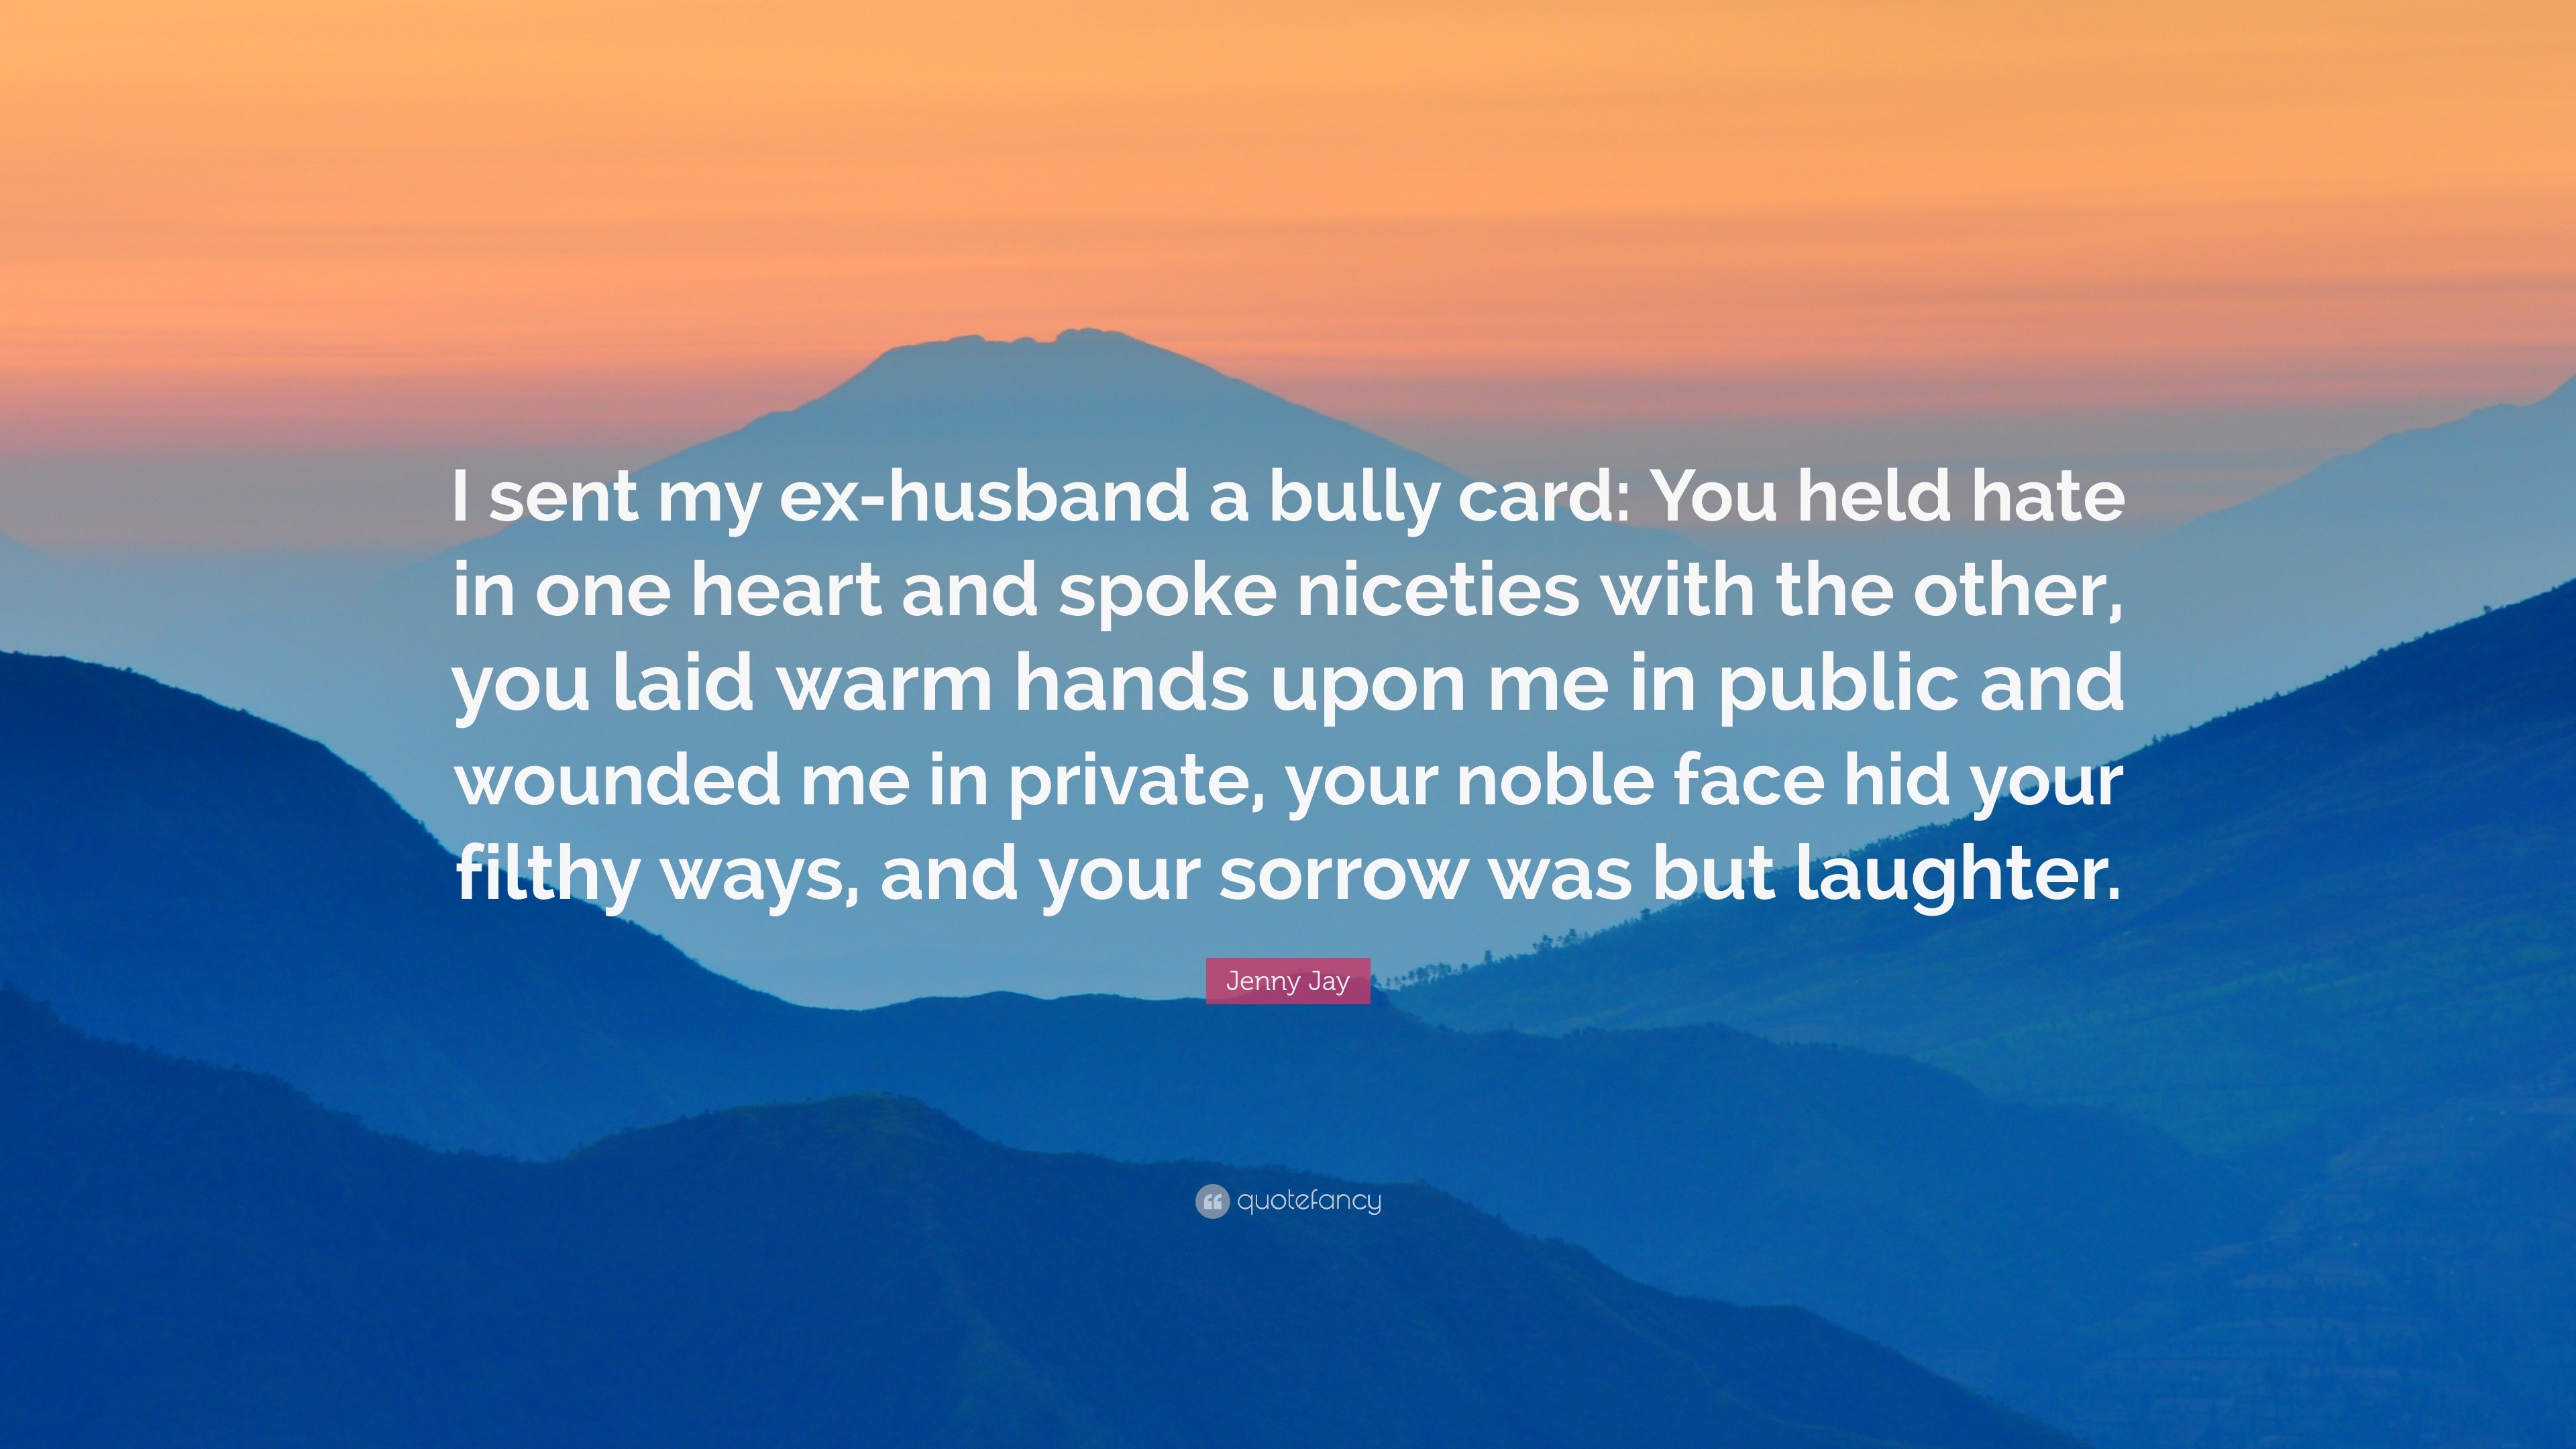 3840x2160 Jenny Jay Quote: “I sent my ex-husband a bully card: You